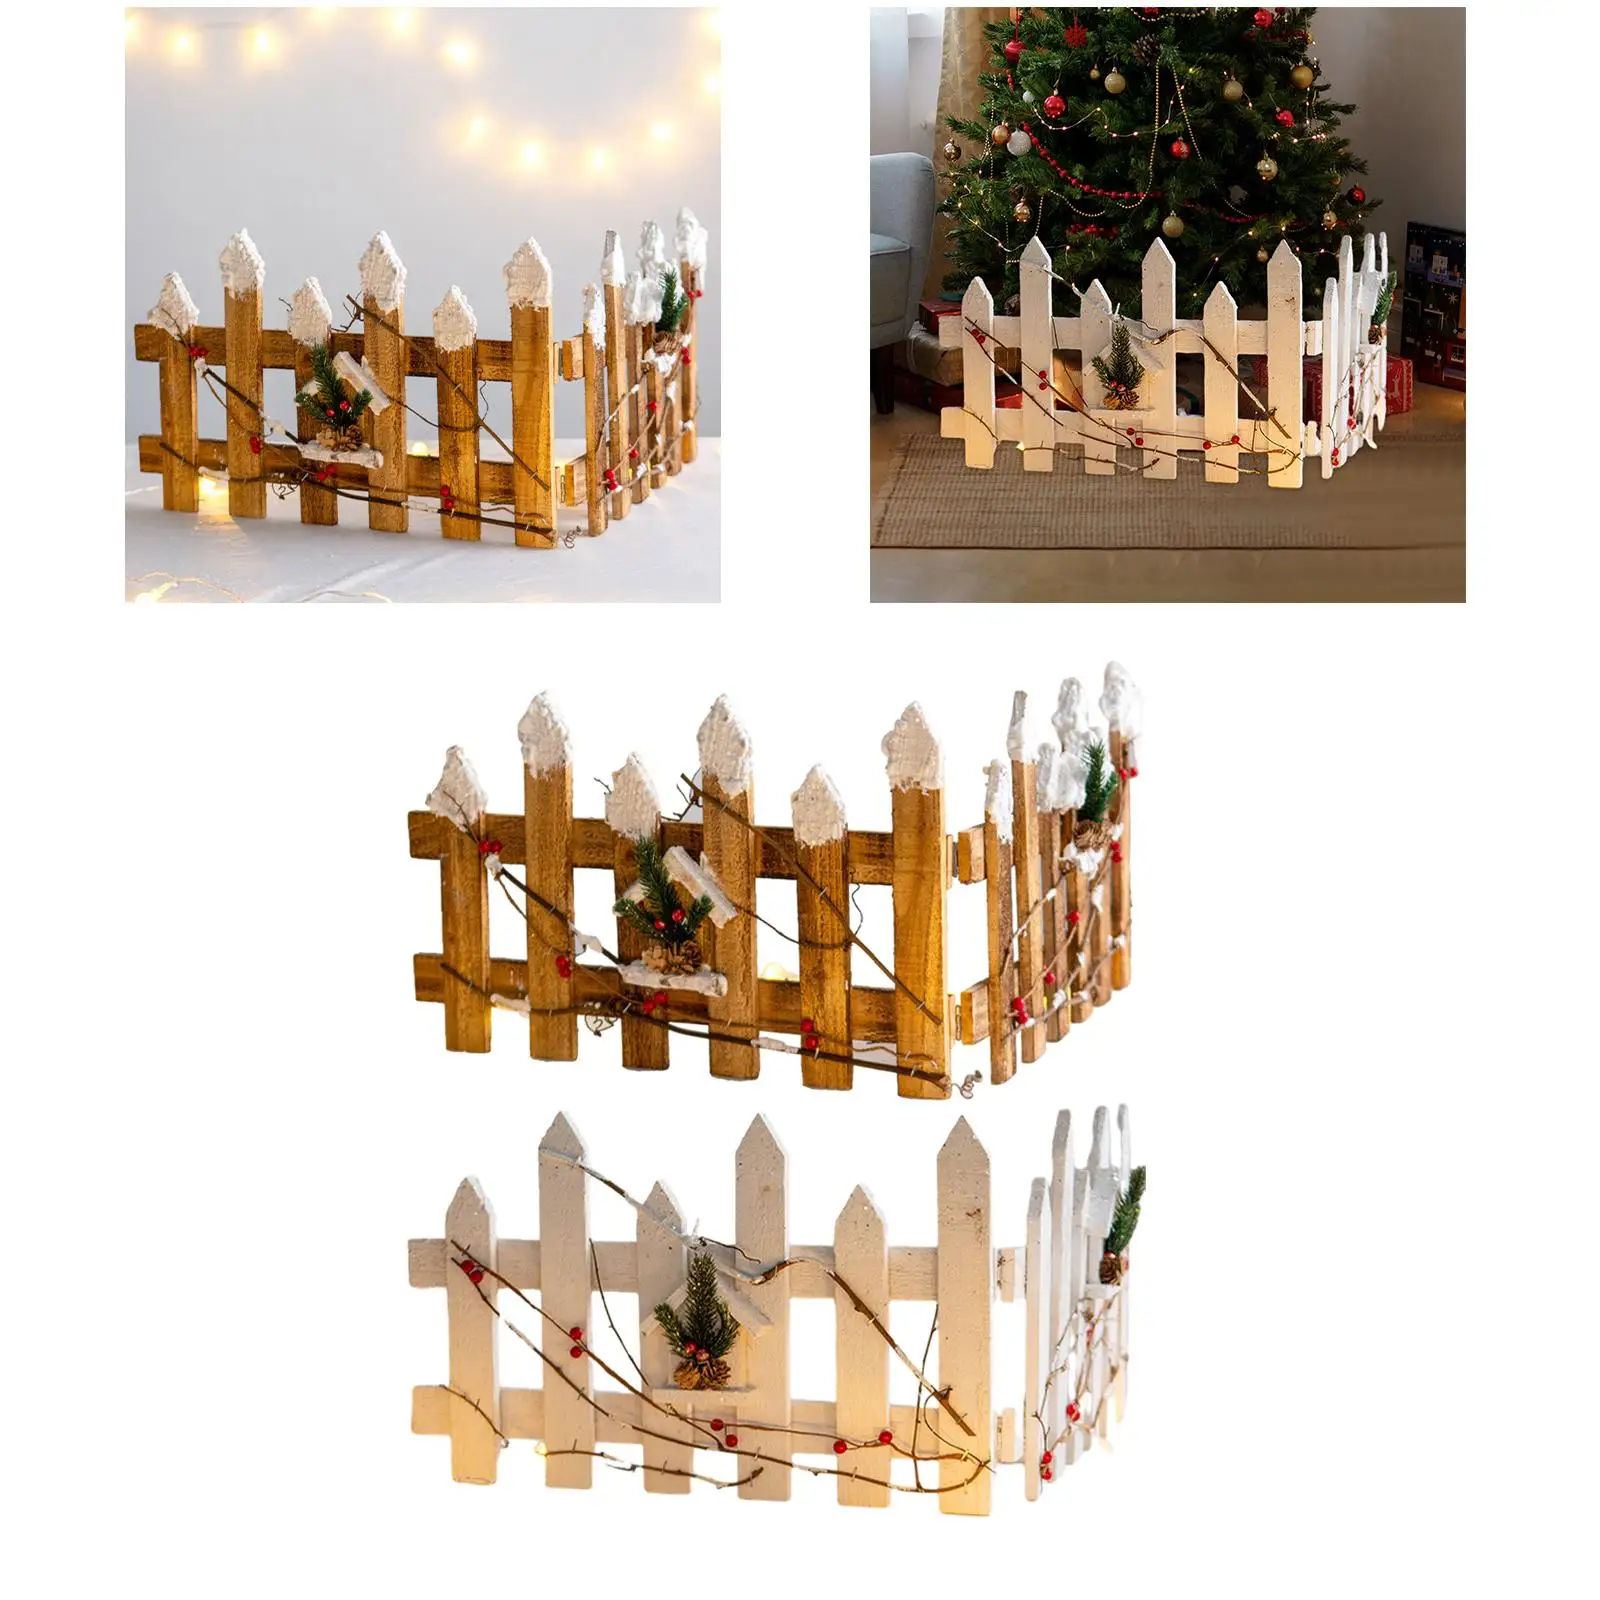 Christmas Wooden Picket Fence Wood Christmas Tree Fence Decoration Indoor Garden Decoration for Holiday Home Party Decor